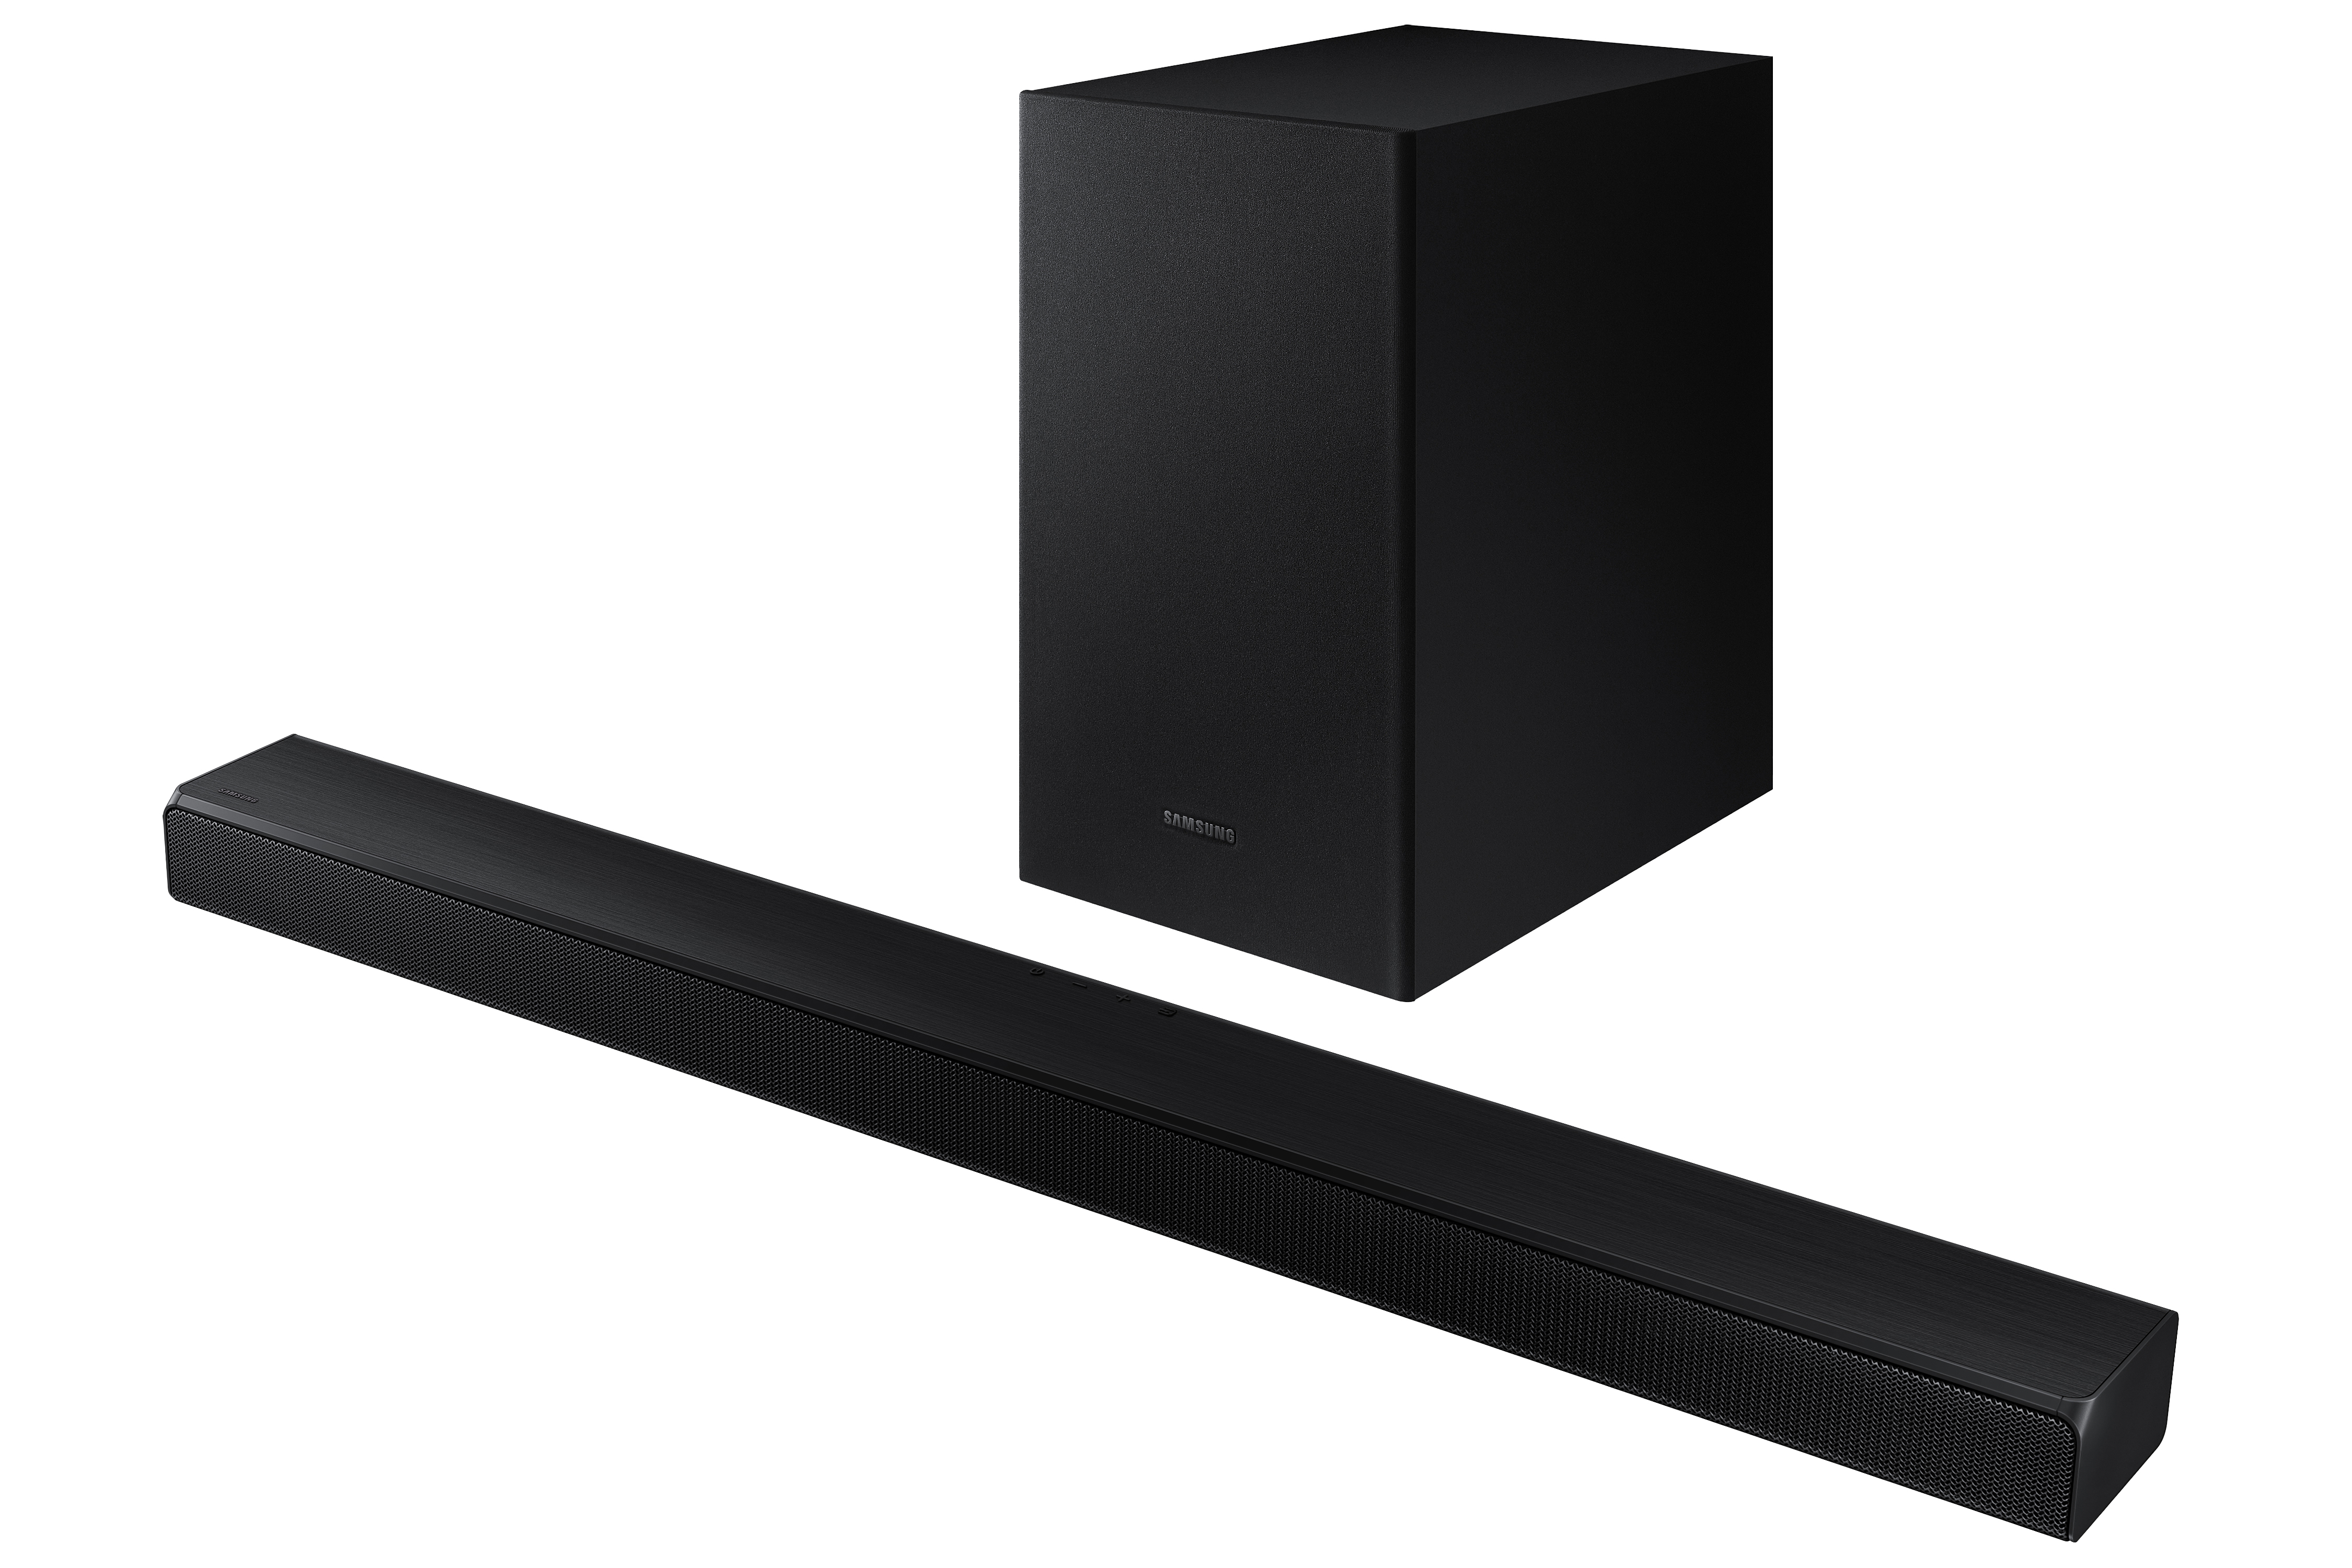 SAMSUNG HW-A50M 2.1 Channel Soundbar with Wireless Subwoofer and Dolby Audio - image 3 of 13